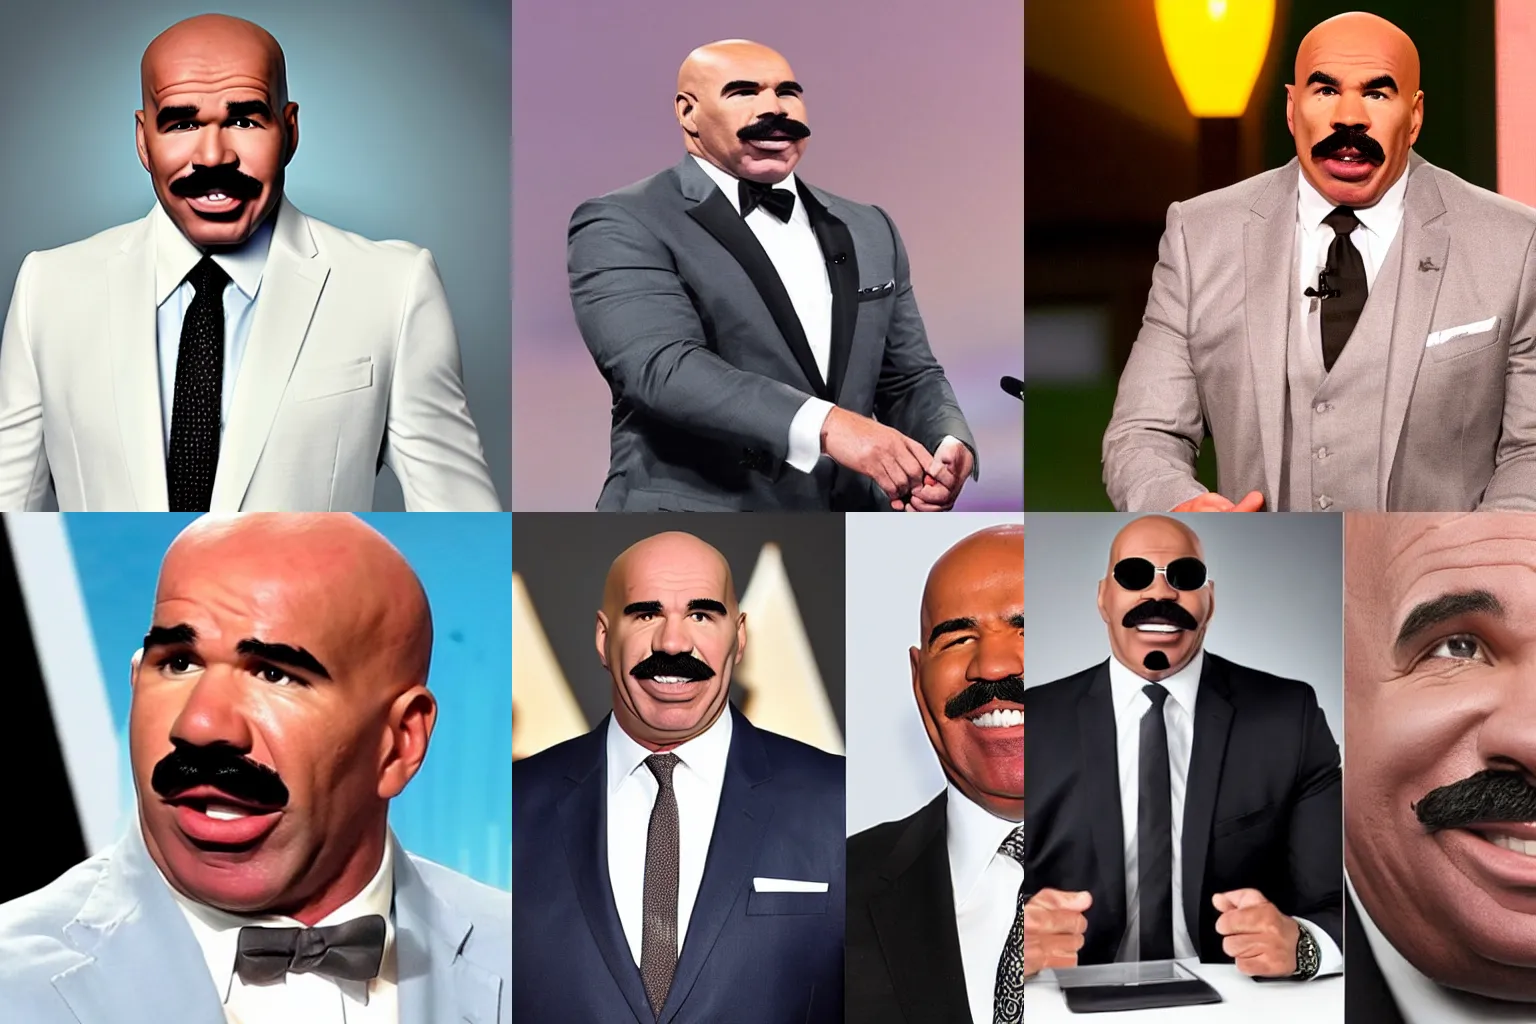 Prompt: a white man that looks an awful lot like Steve Harvey